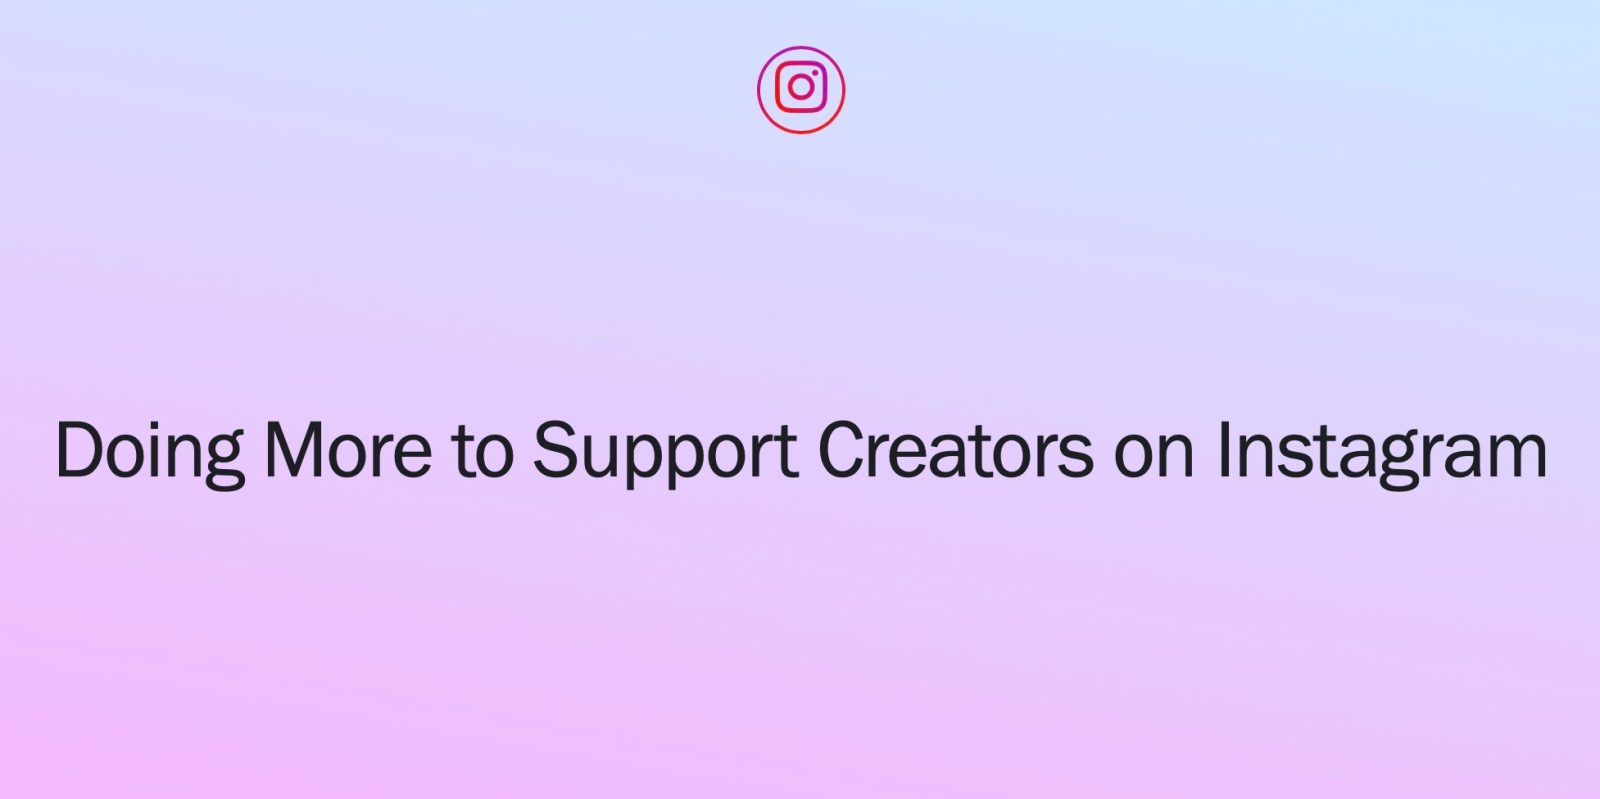 https://9to5mac.com/wp-content/uploads/sites/6/2020/05/instagram-igtv-share-ad-revenue-with-creators.jpeg?quality=82&strip=all&w=1600